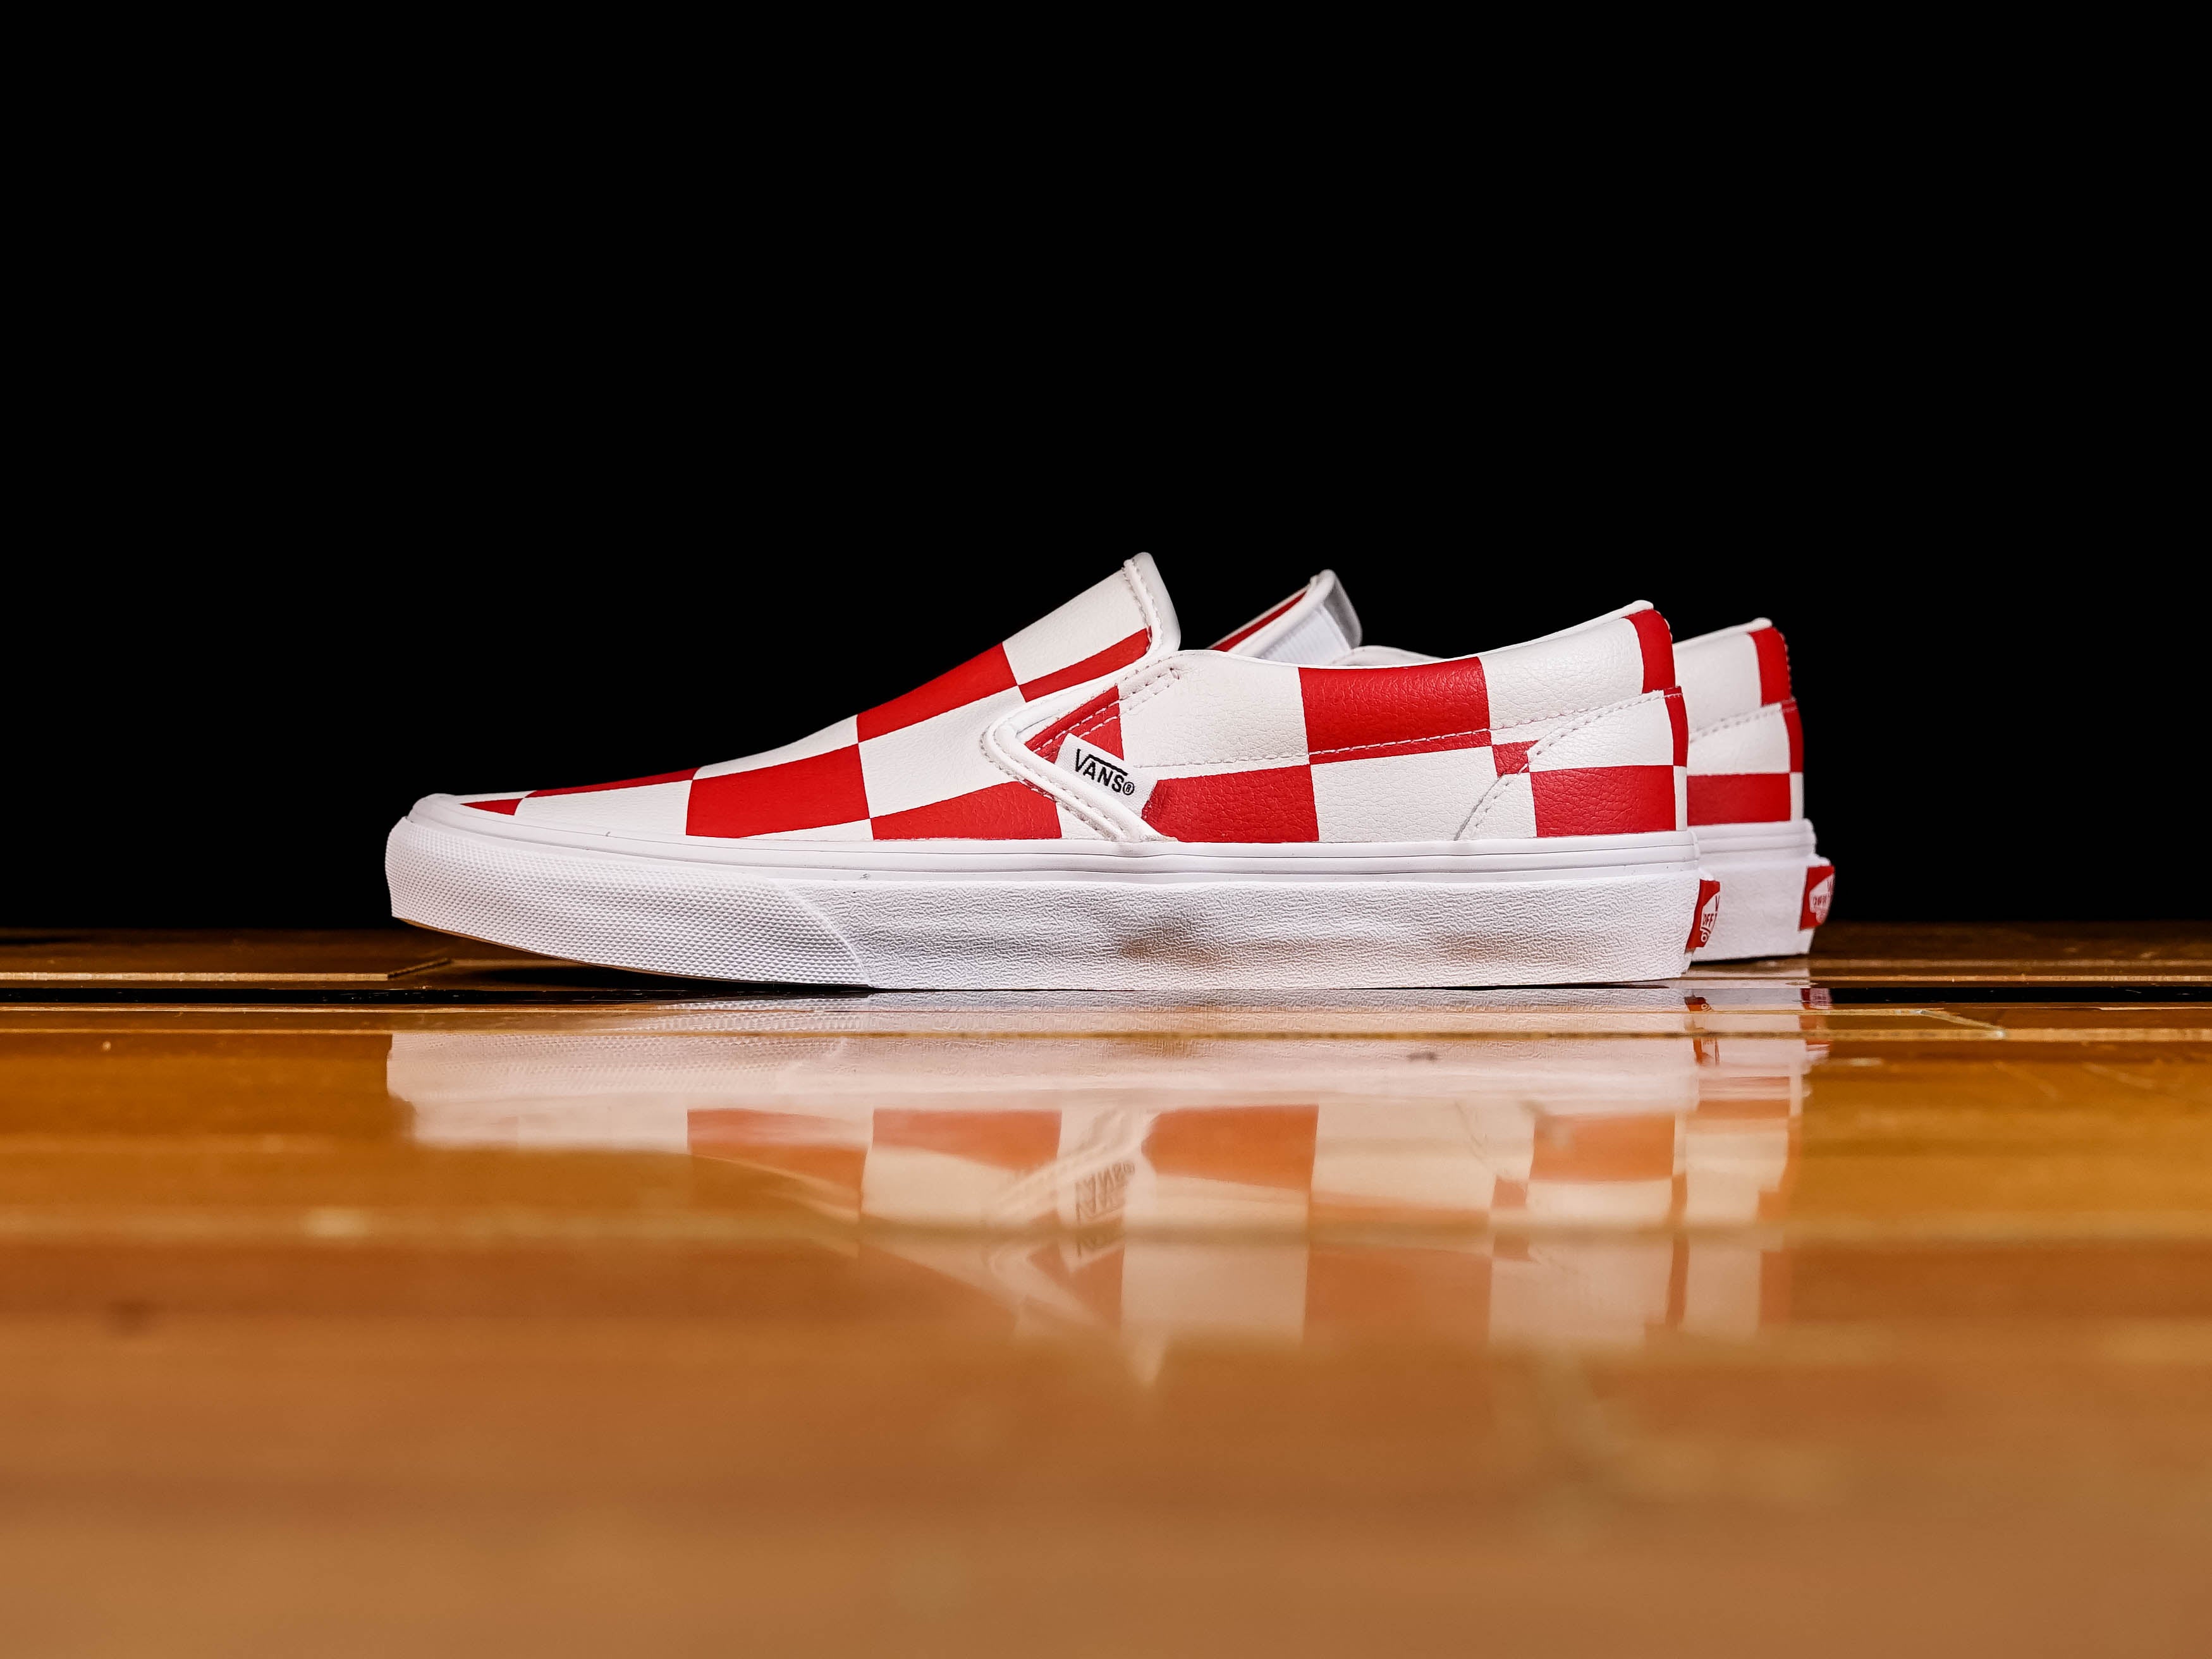 Vans Leather Check Classic Slip-On [VN0A4BV3TBV]